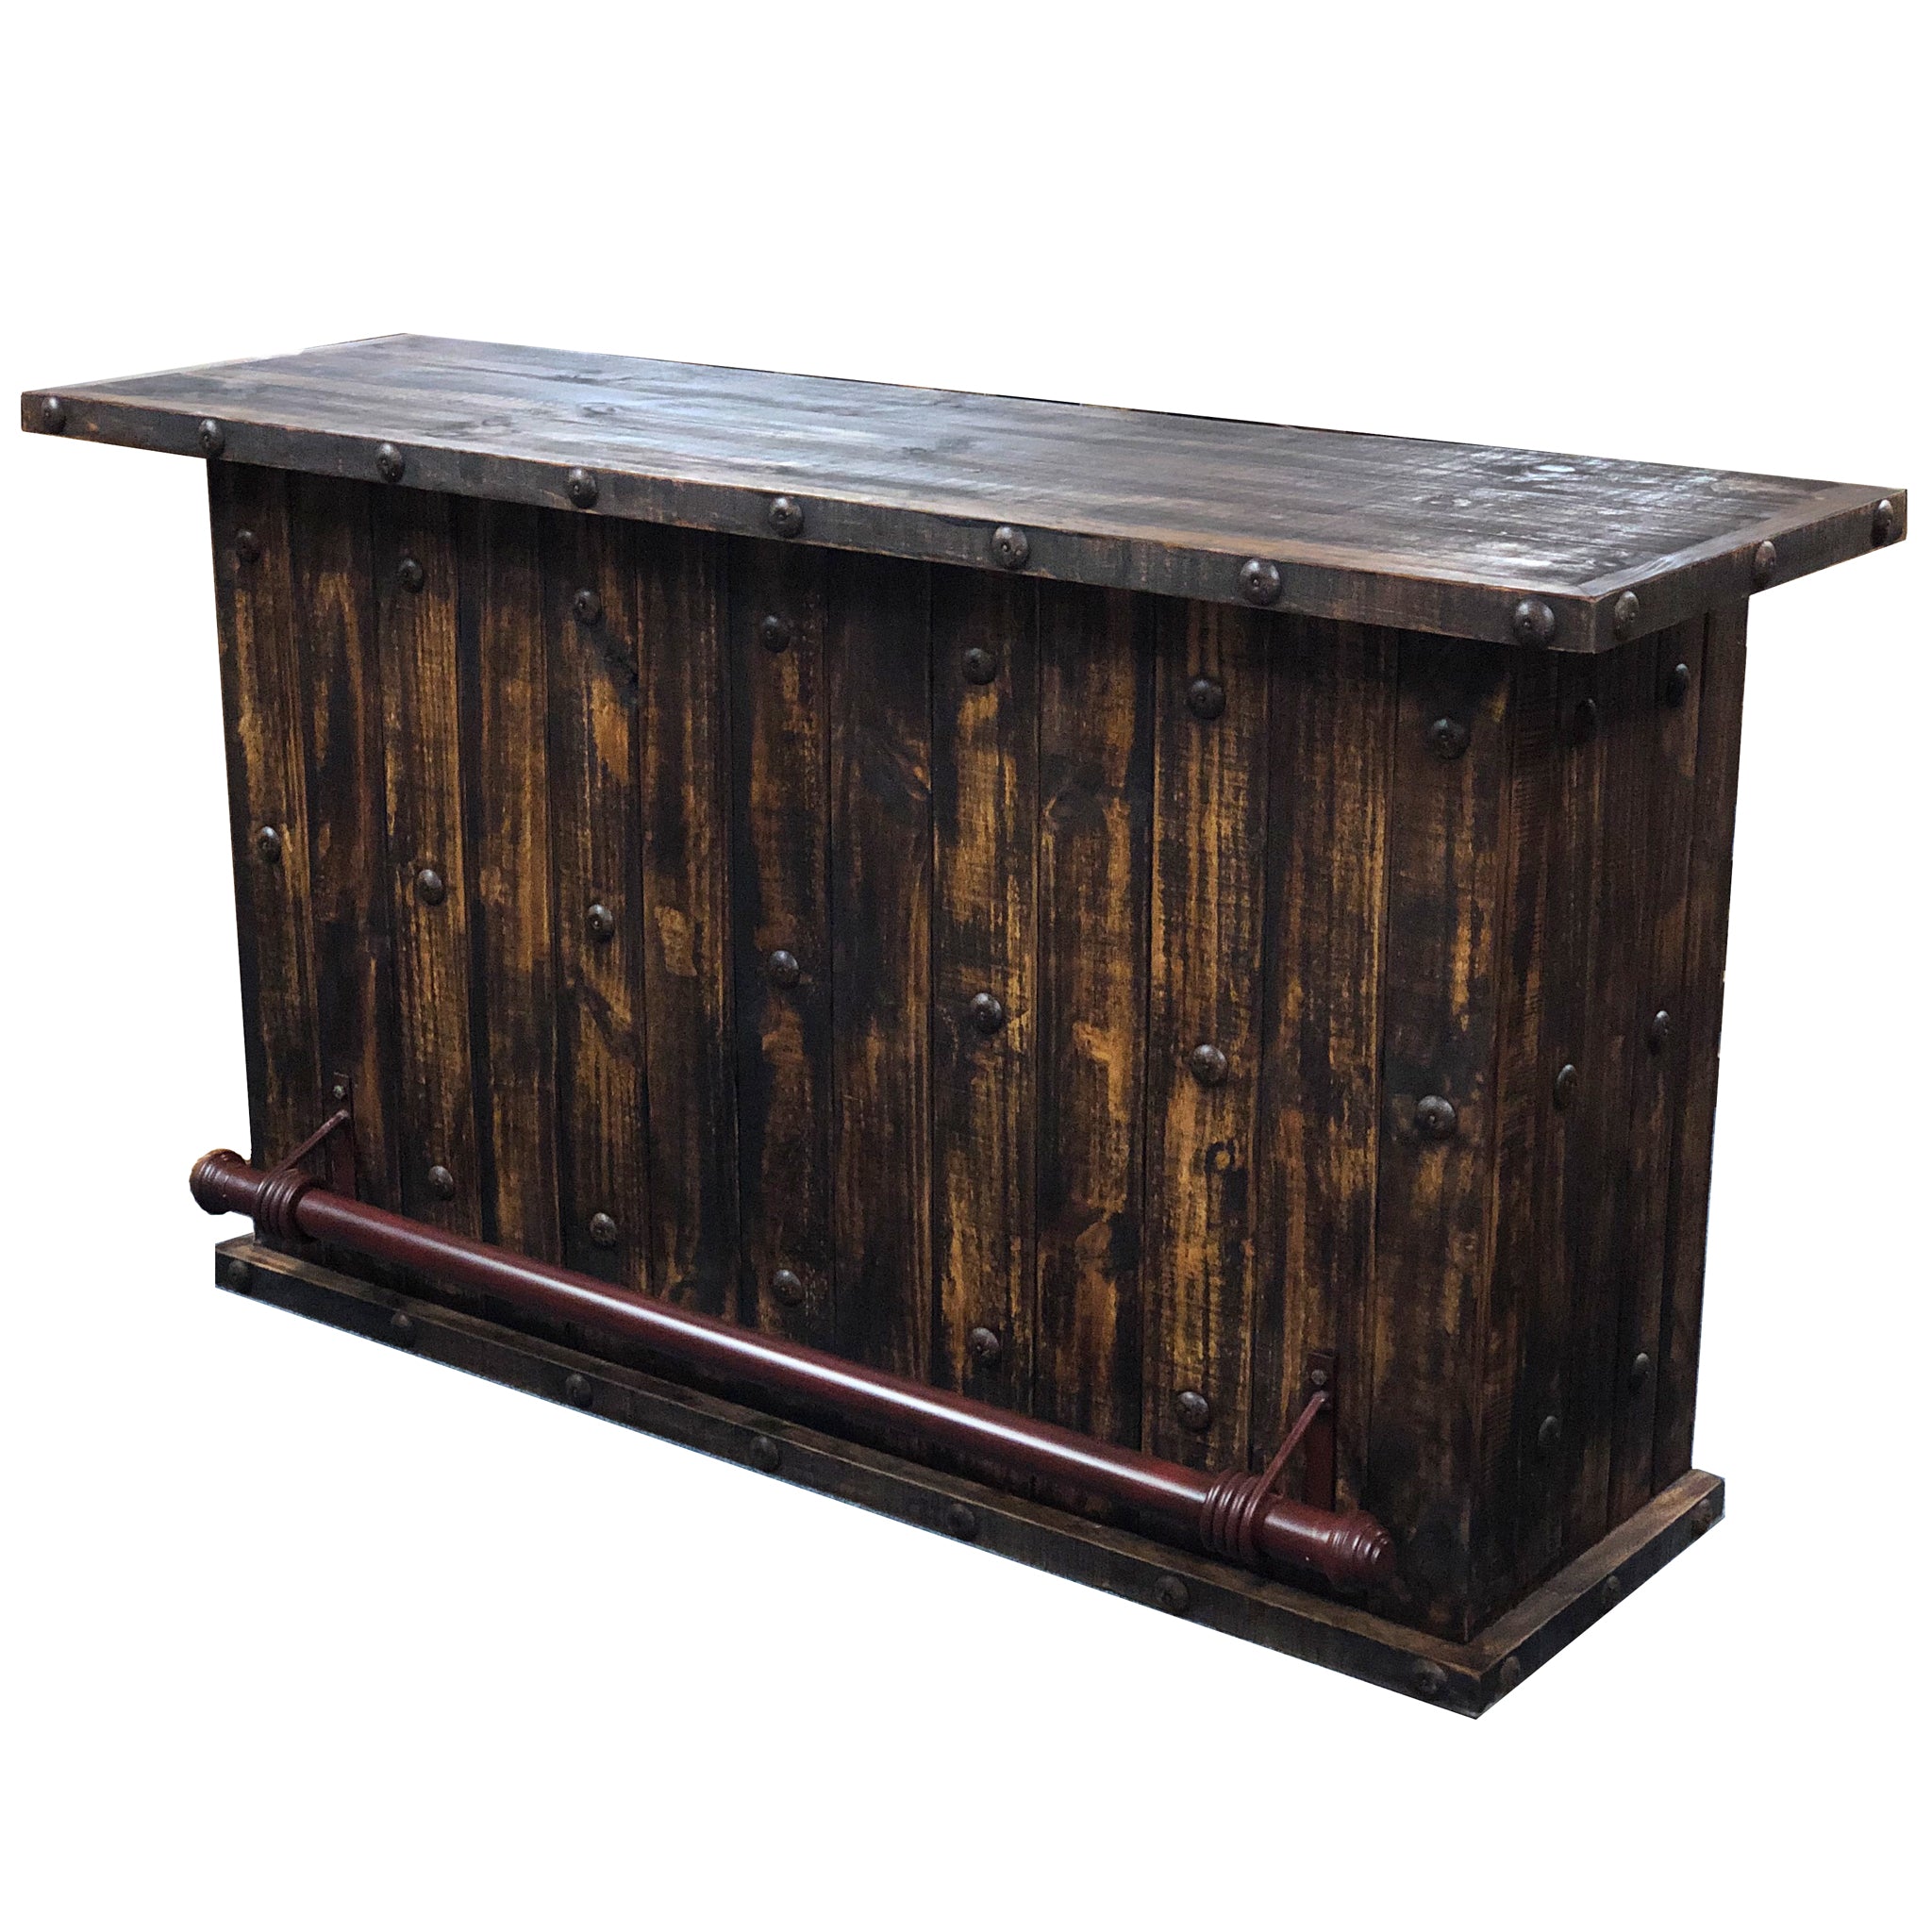 Rustics For Less Rustic Furniture And More Rustics For Less